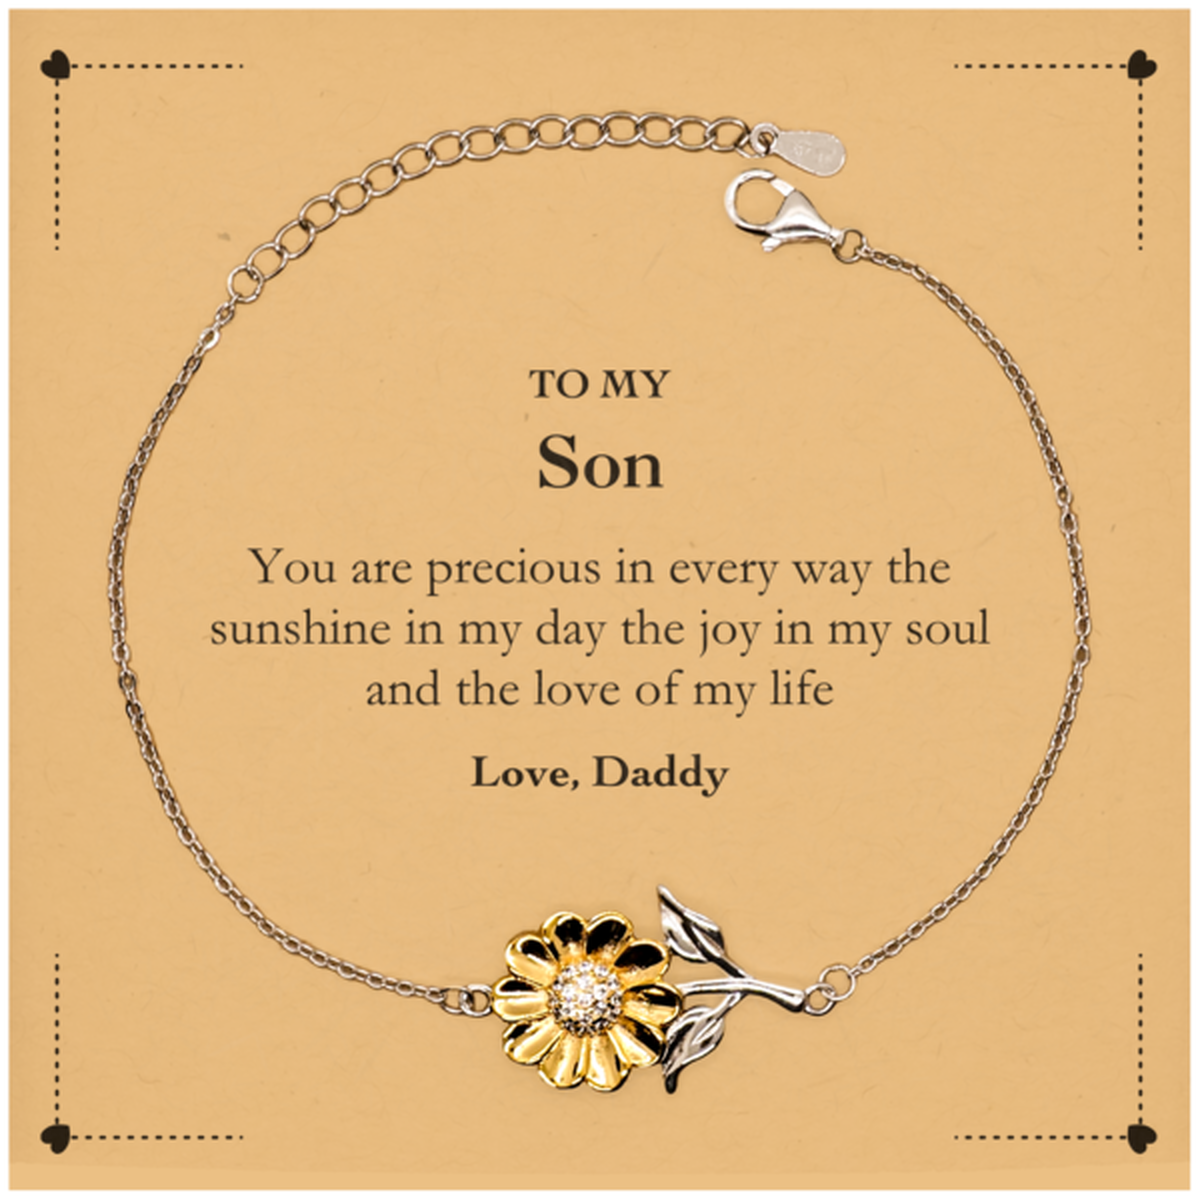 Graduation Gifts for Son Sunflower Bracelet Present from Daddy, Christmas Son Birthday Gifts Son You are precious in every way the sunshine in my day. Love, Daddy